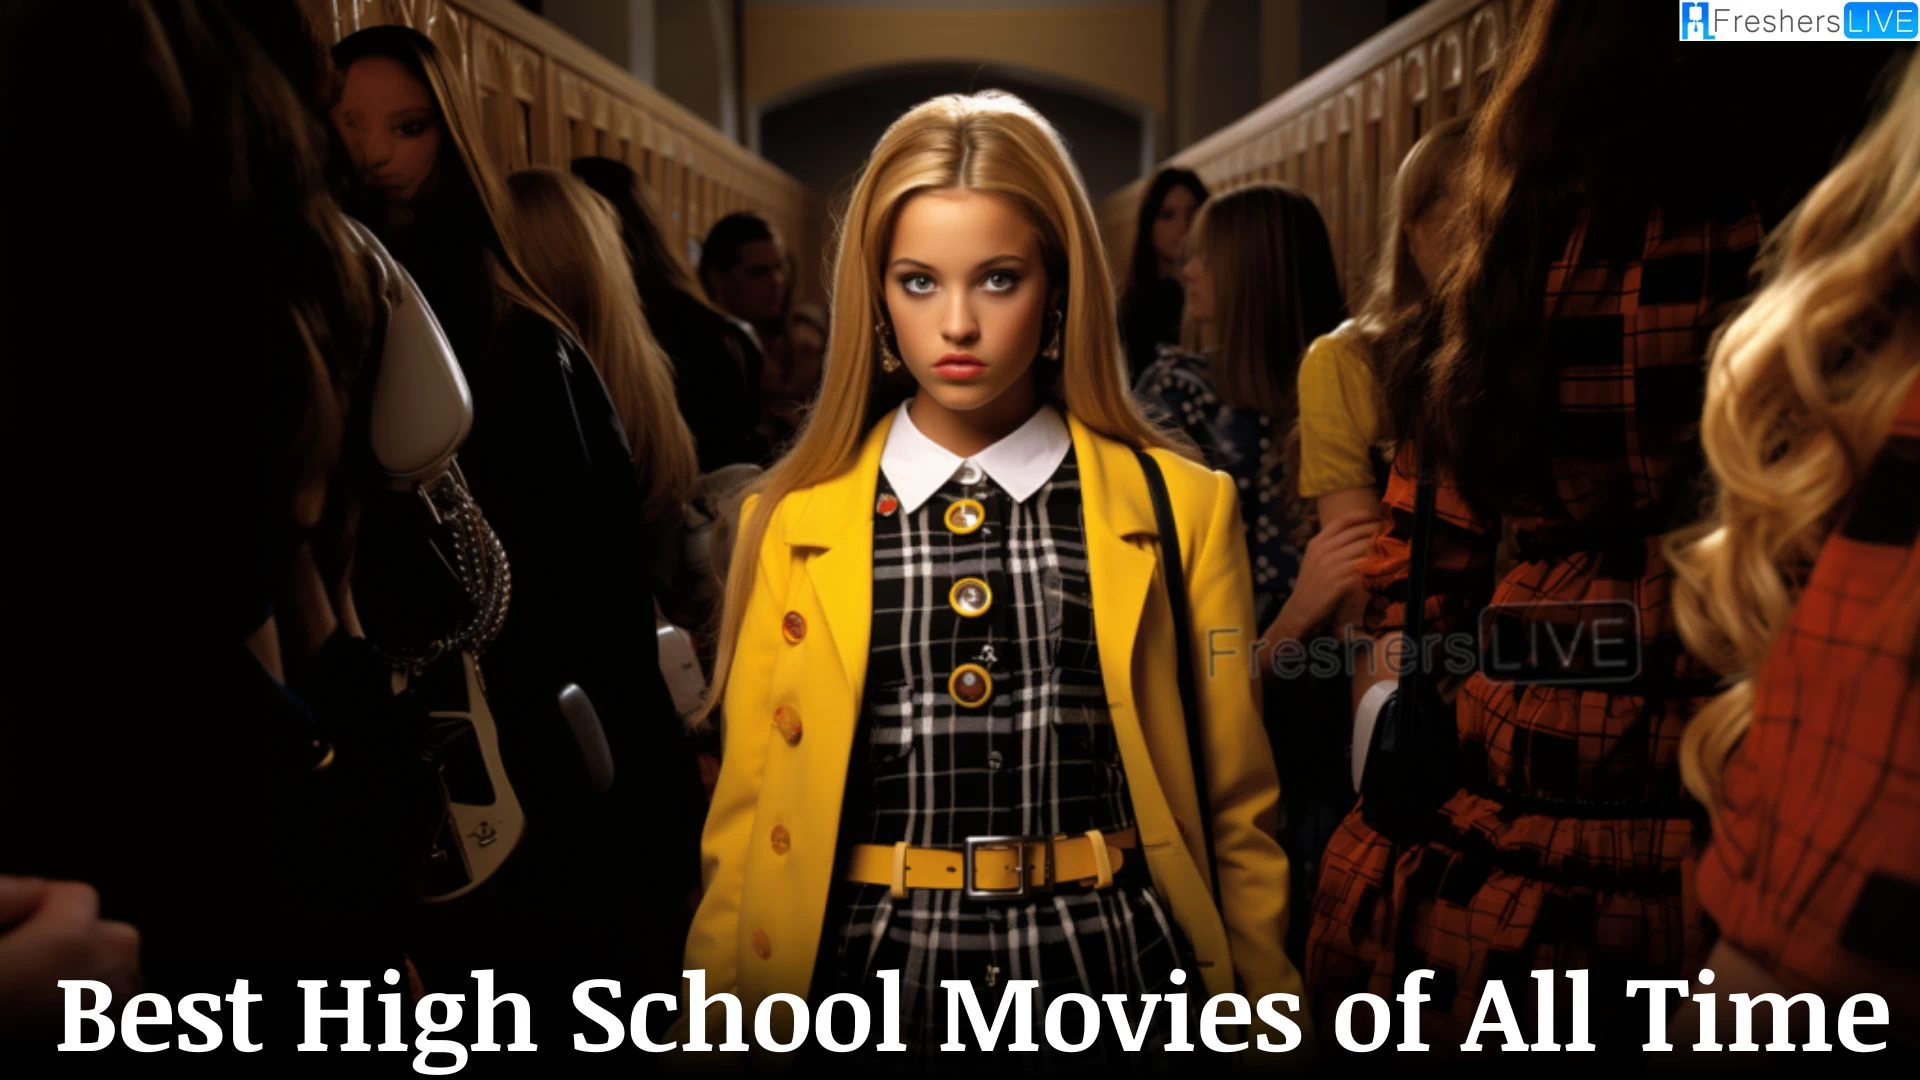 Best High School Movies of All Time - Top 10 Heartwarming Tales